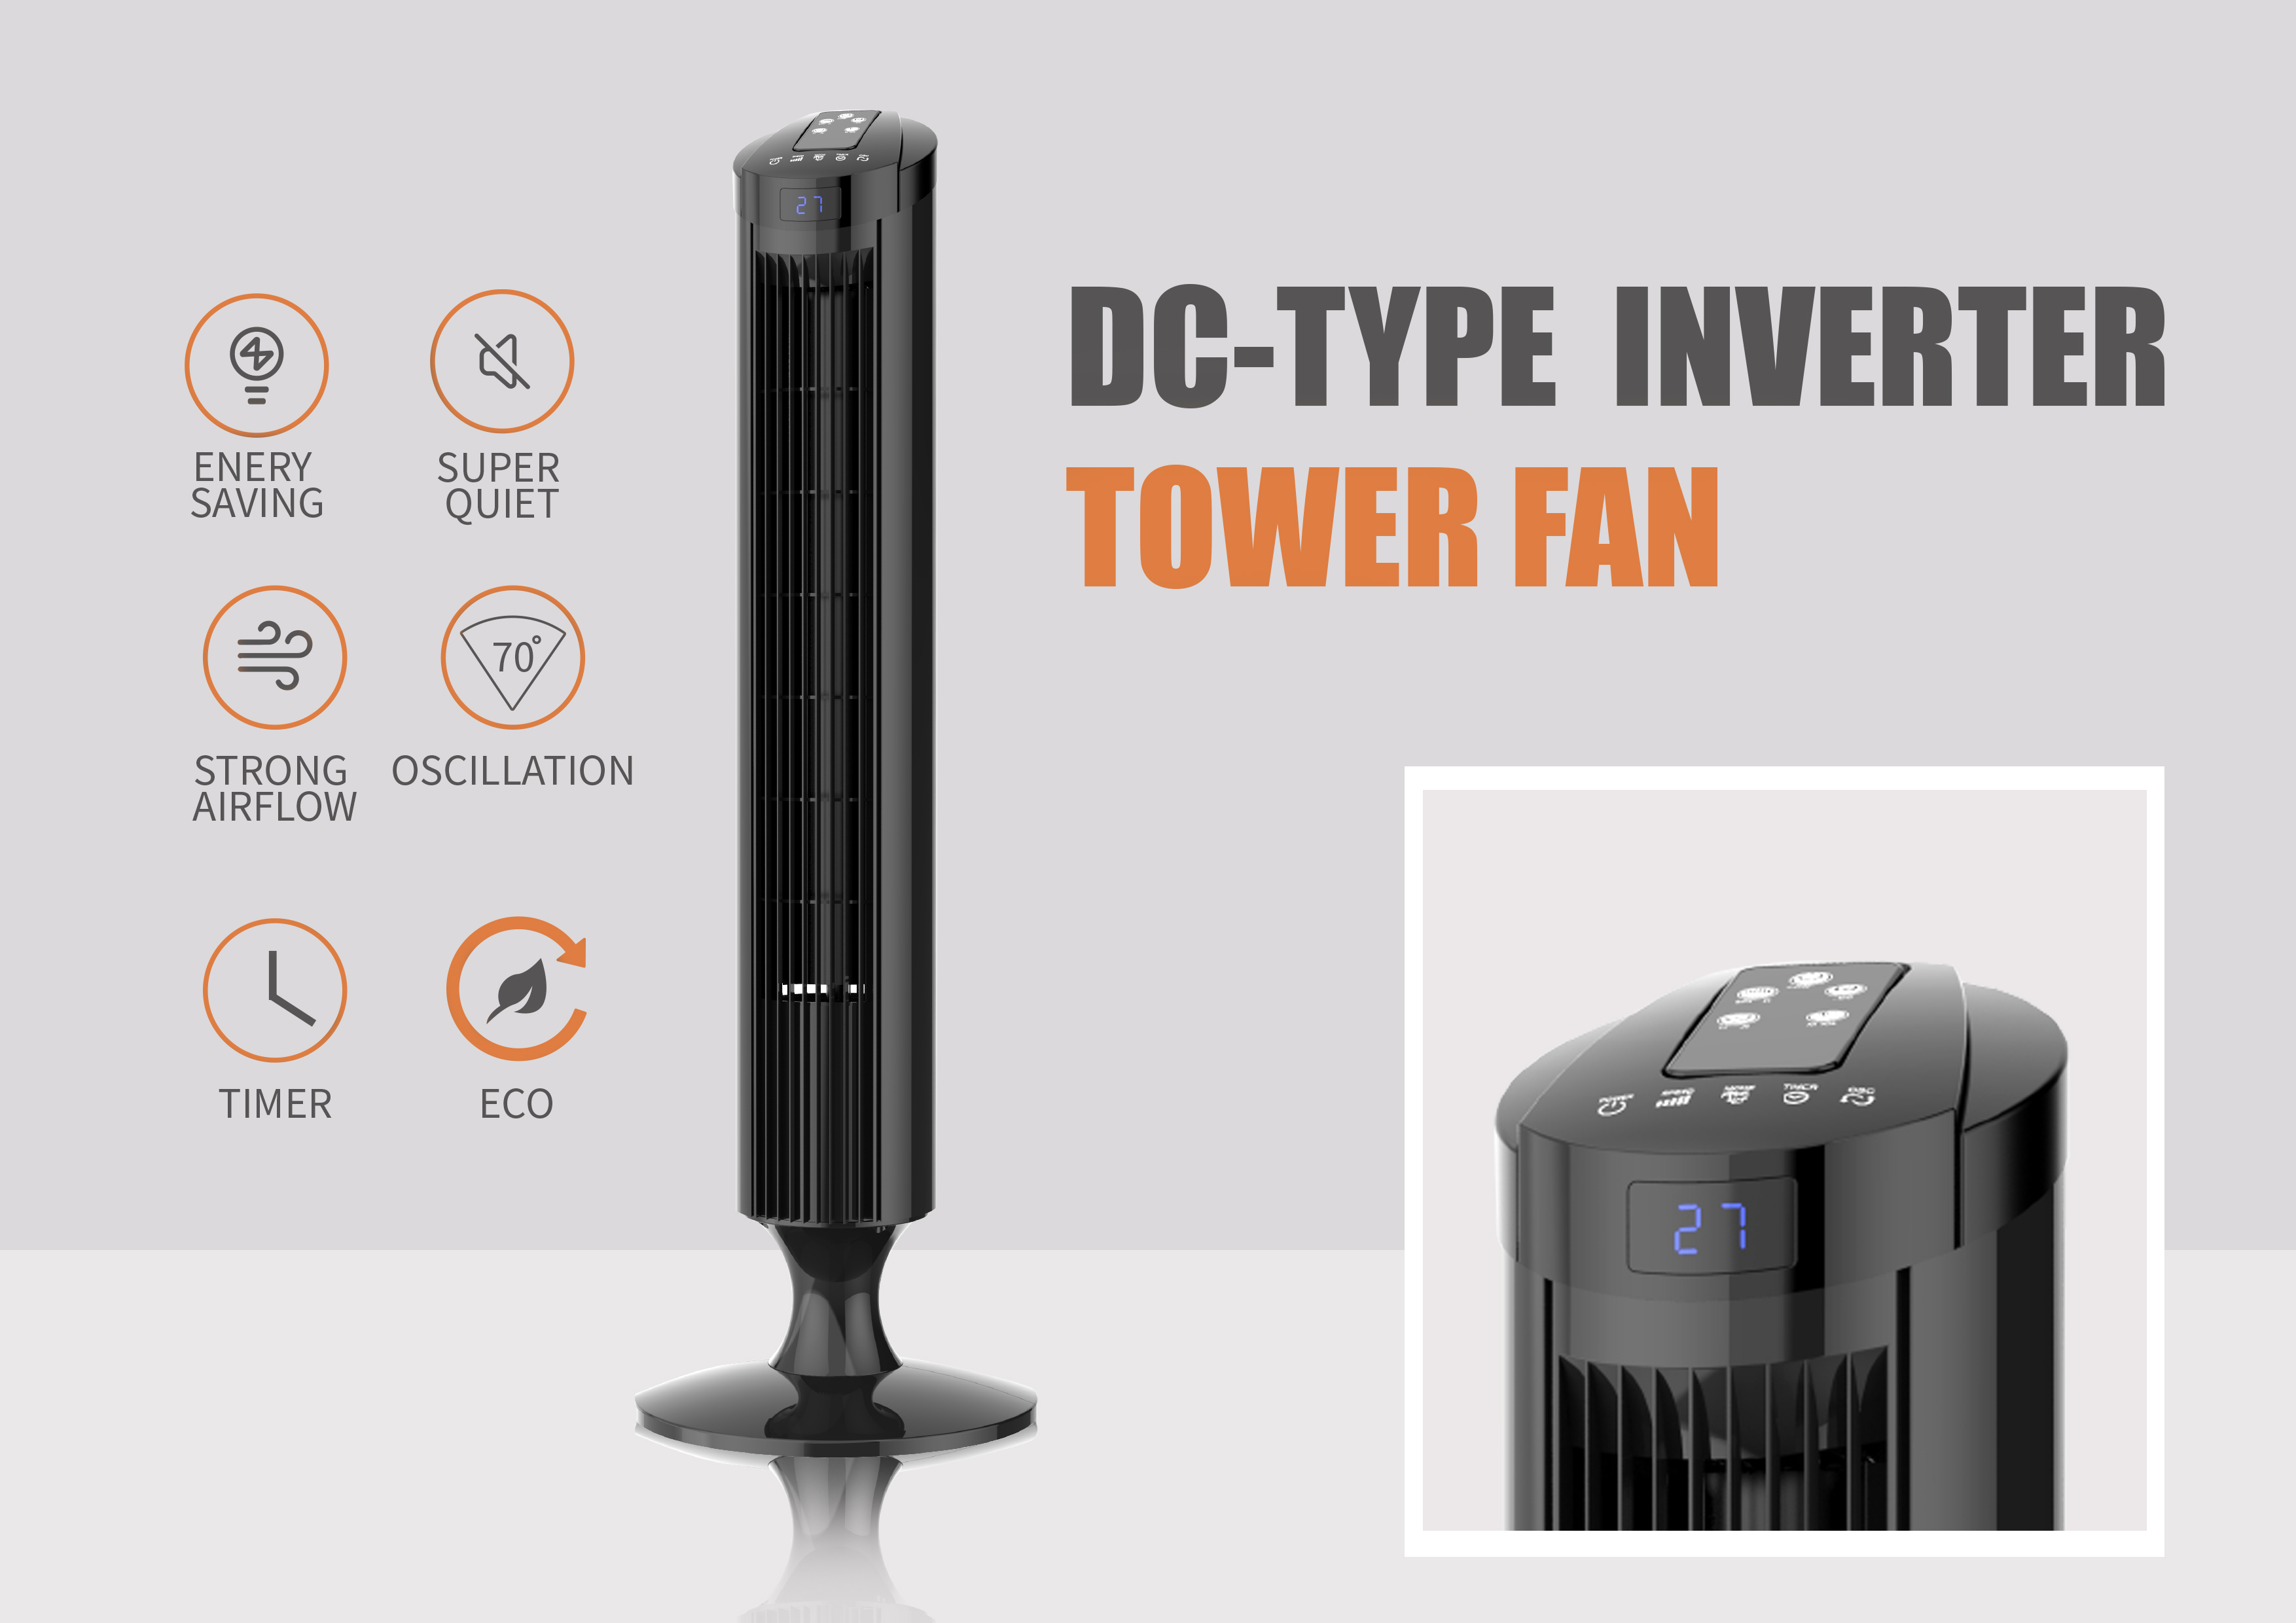 Remote control bladeless tower fan